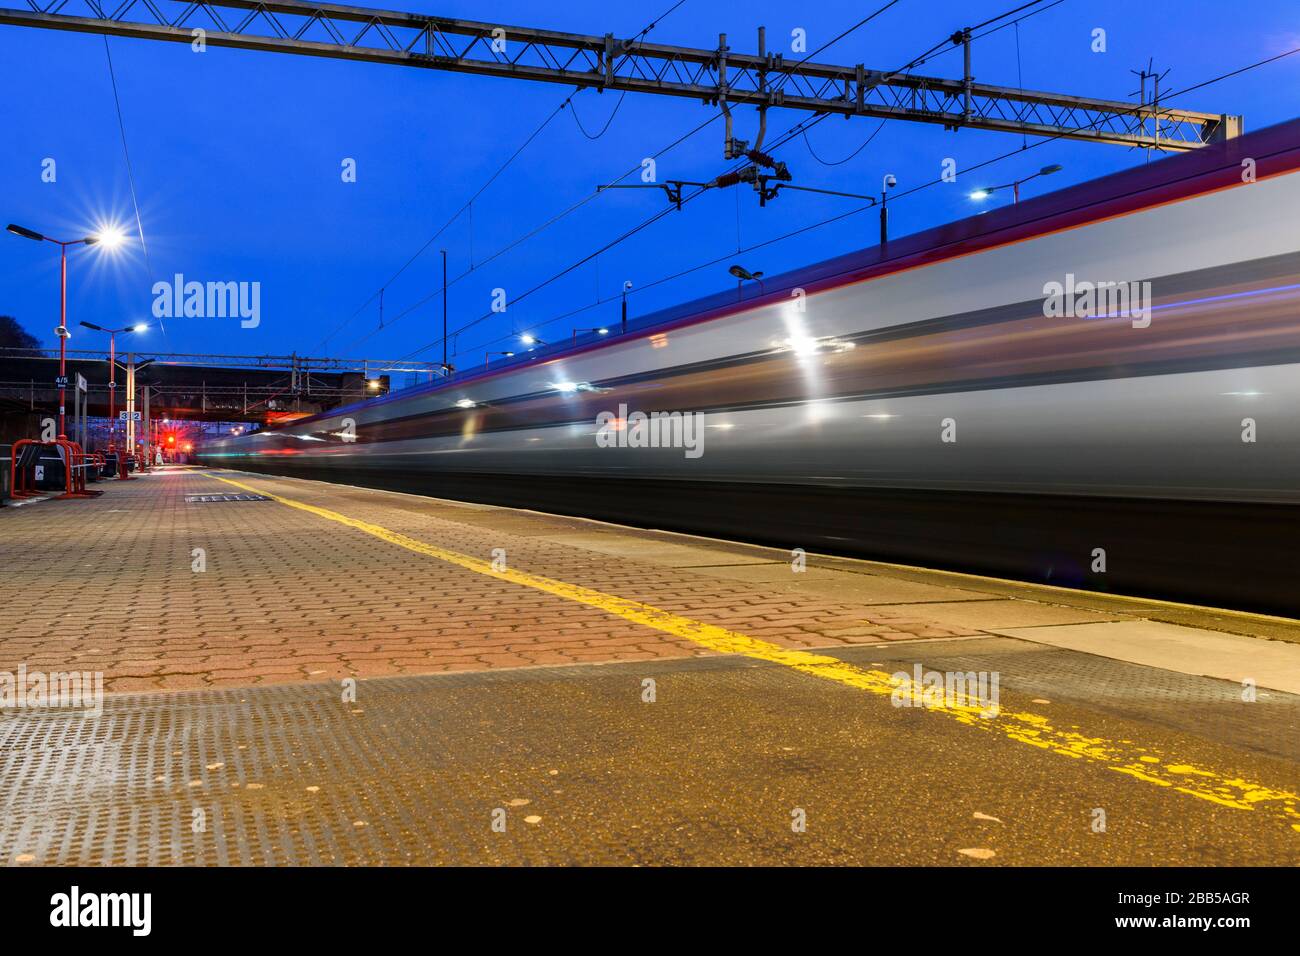 Early morning long exposure view of Virgin Trains Class 390 Pendolino express train arriving at Coventry railway station with a train to London Stock Photo